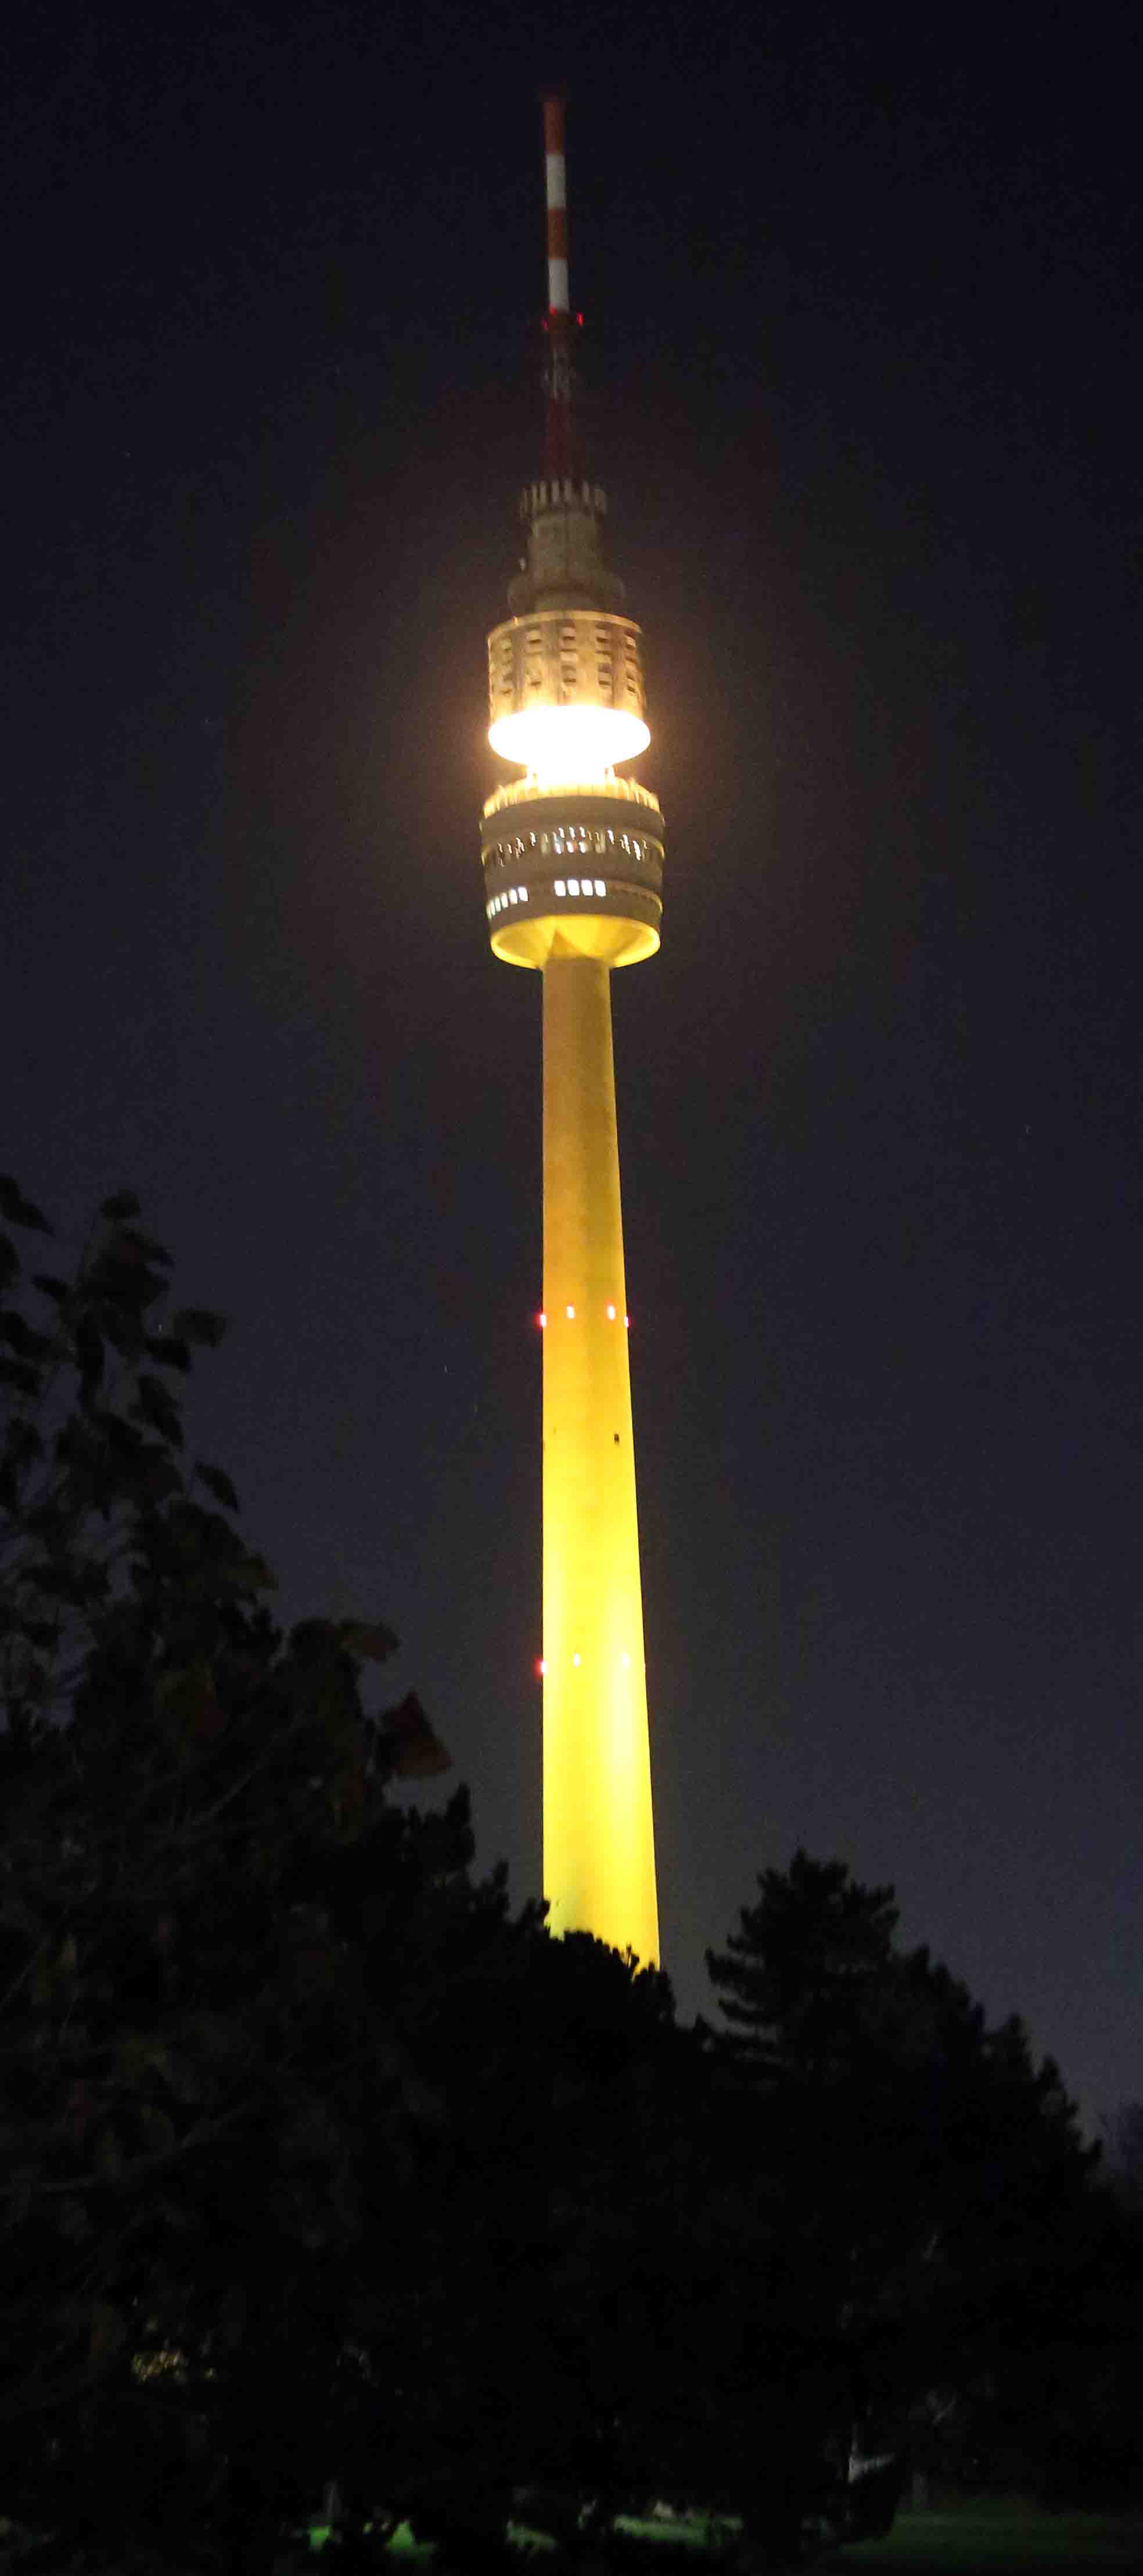 Image of Florian tower